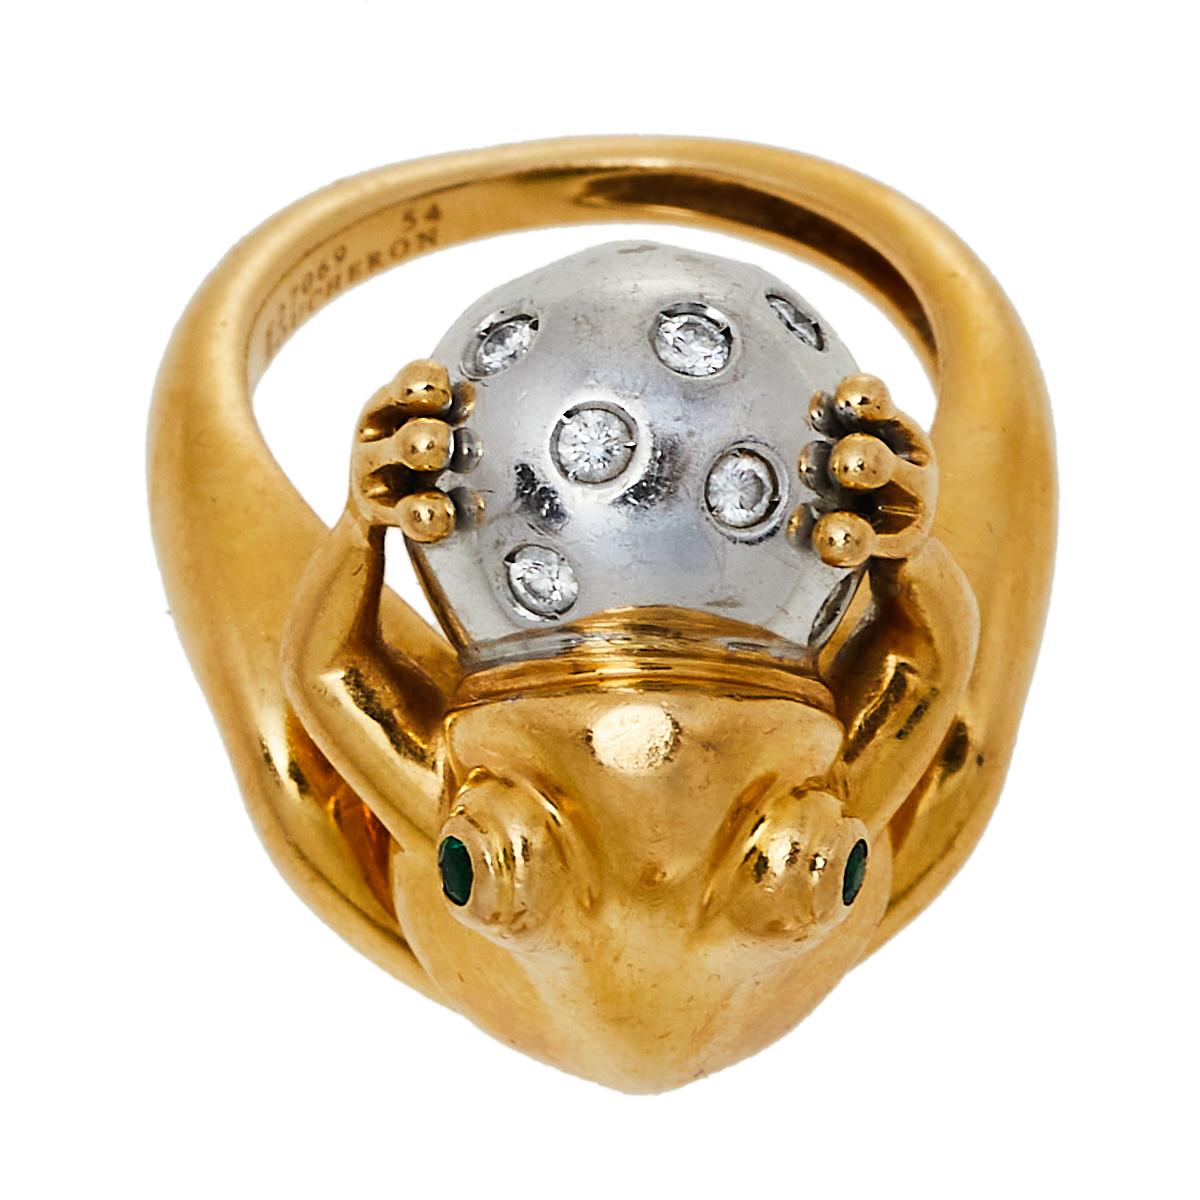 Creations from Boucheron are so beautiful and creative, they often take our breath away! This exquisite Grenouille ring is sculpted from 18K gold in two tones. On top of a smooth band, a well-carved yellow gold frog sits holding a white gold ball in